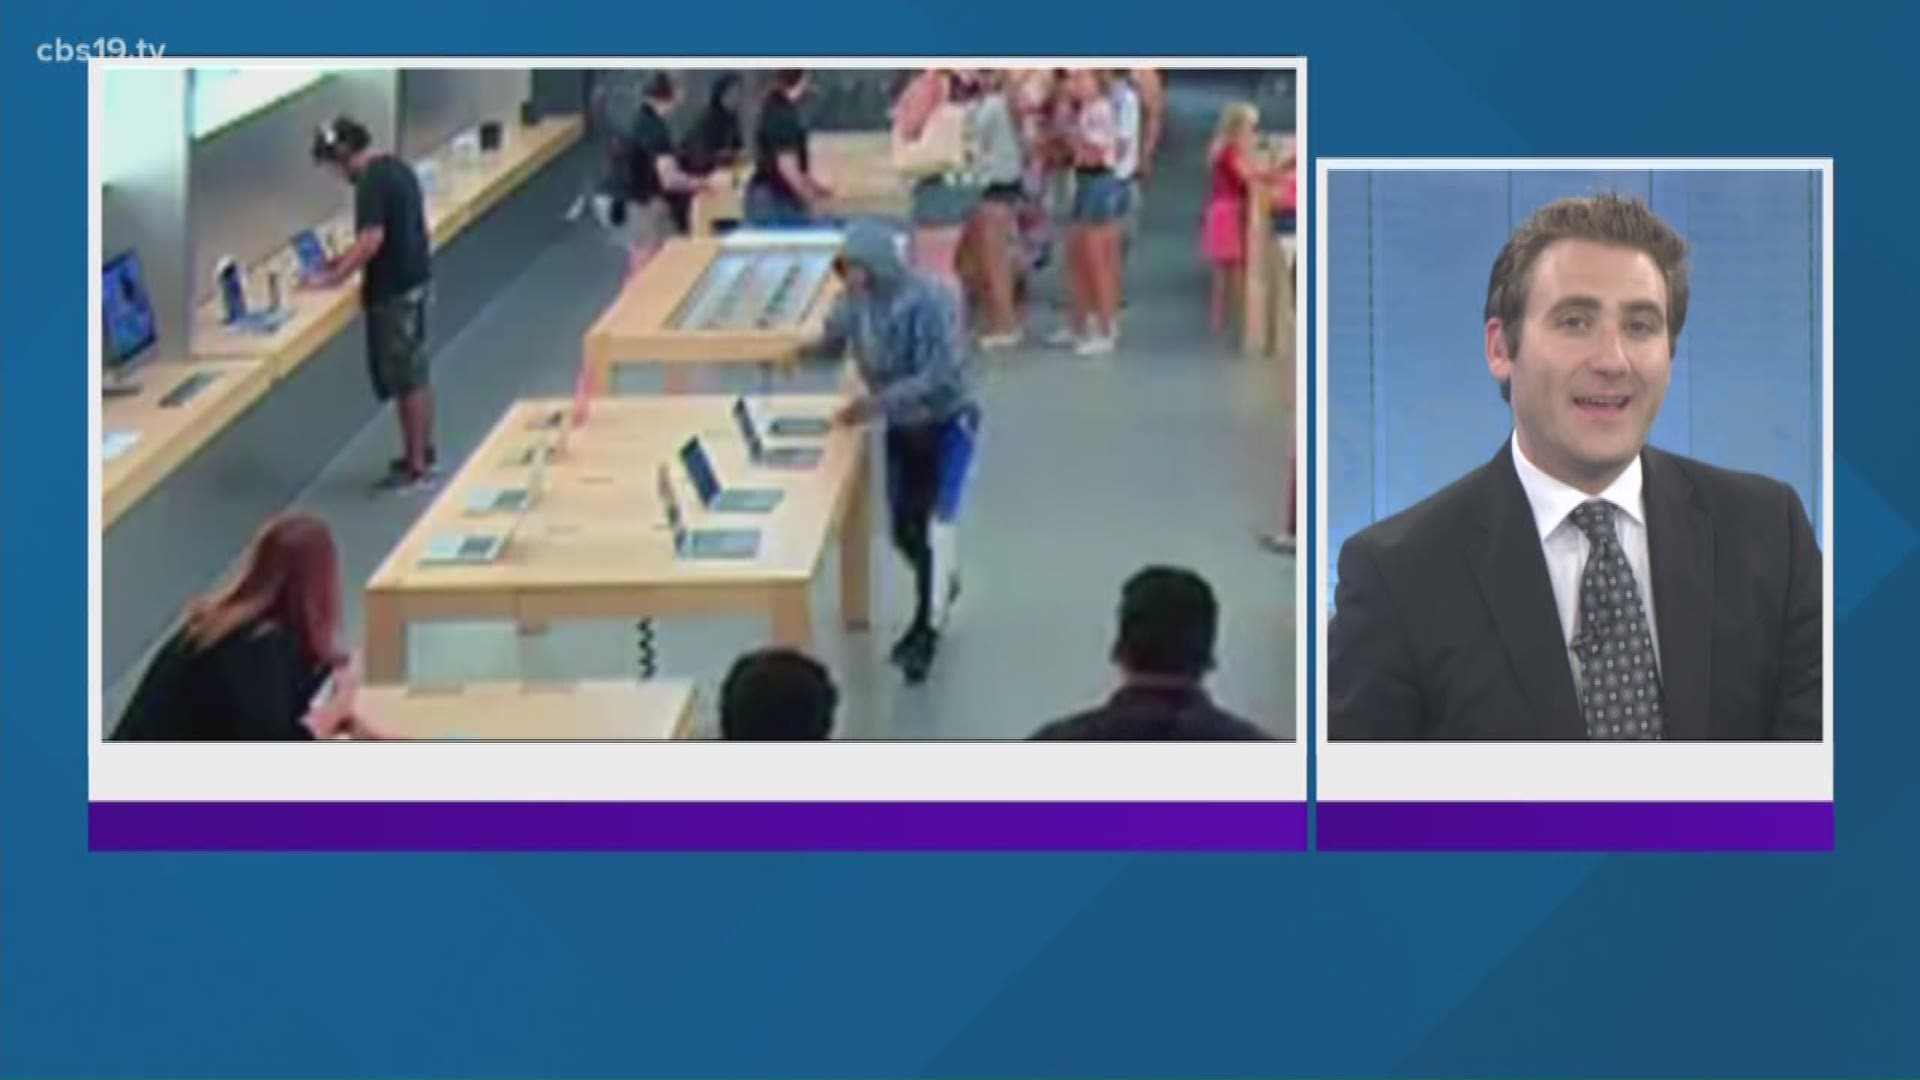 Trending tonight: An Apple store robbery, George Clooney's accident, Drake's record breaking feat, plus snakes on a plane.